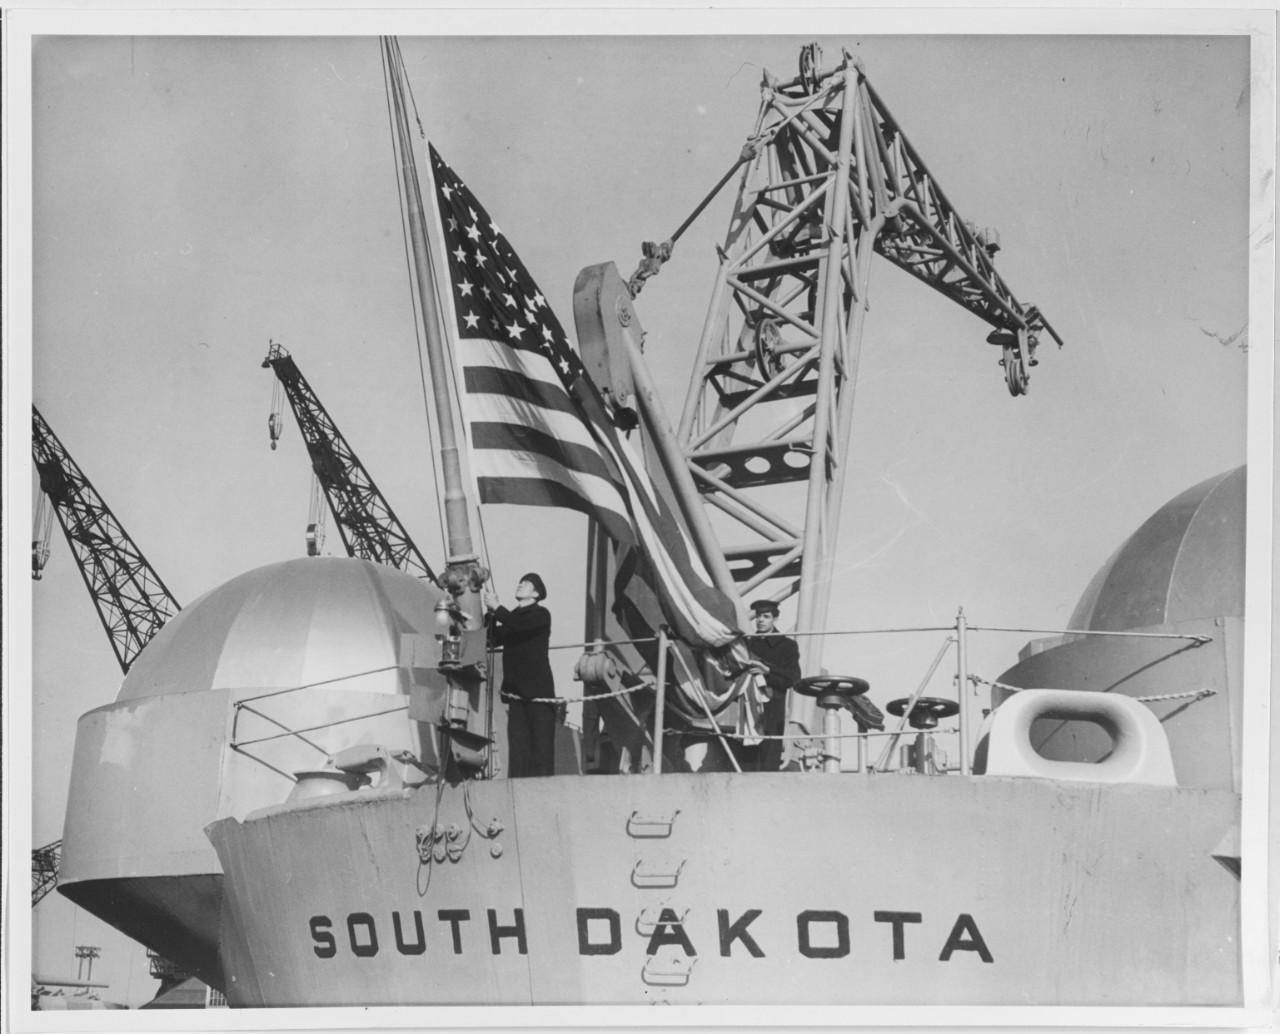 Sailors haul down the colors as South Dakota decommissions at Philadelphia Naval Shipyard, Pa., on 31 January 1947. (U.S. Navy Photograph NH 73929, Naval History and Heritage Command)